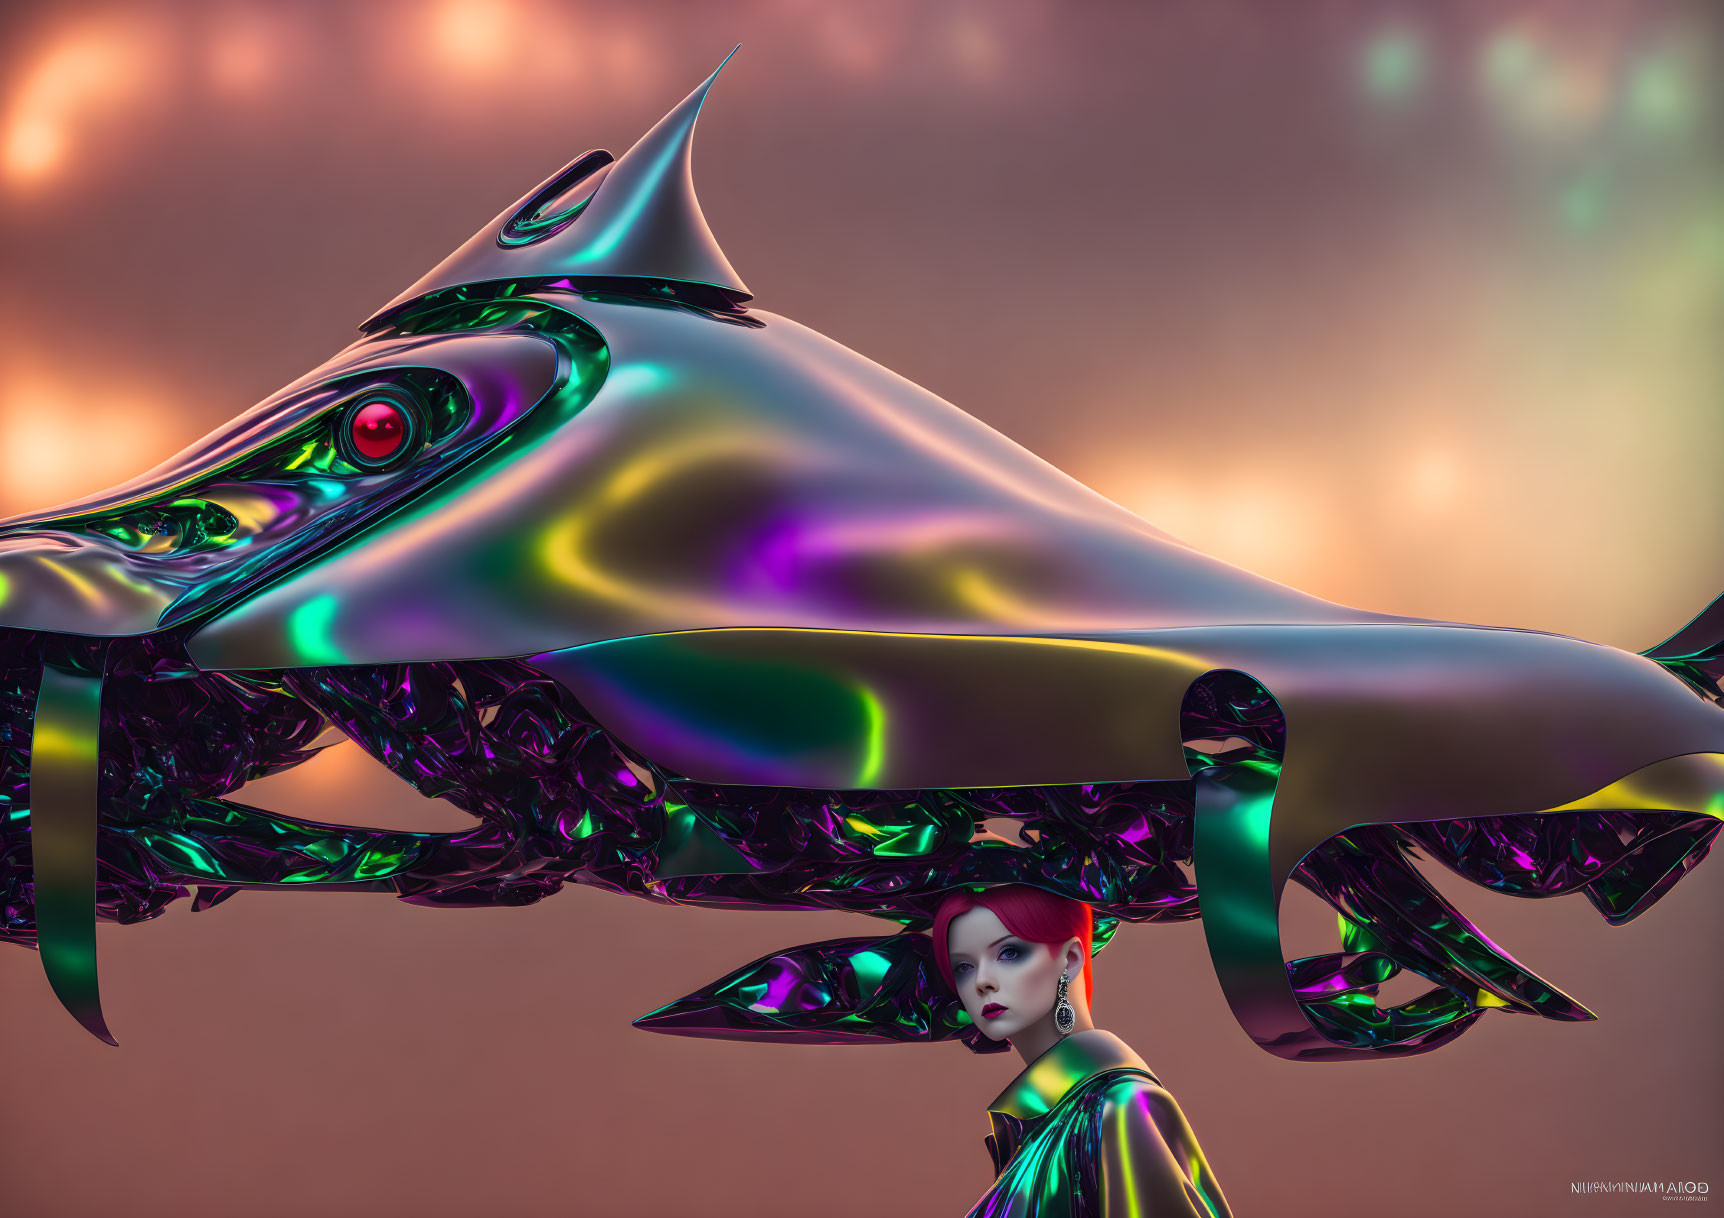 Surreal digital artwork: Woman with metallic shark-like structure against warm-toned backdrop